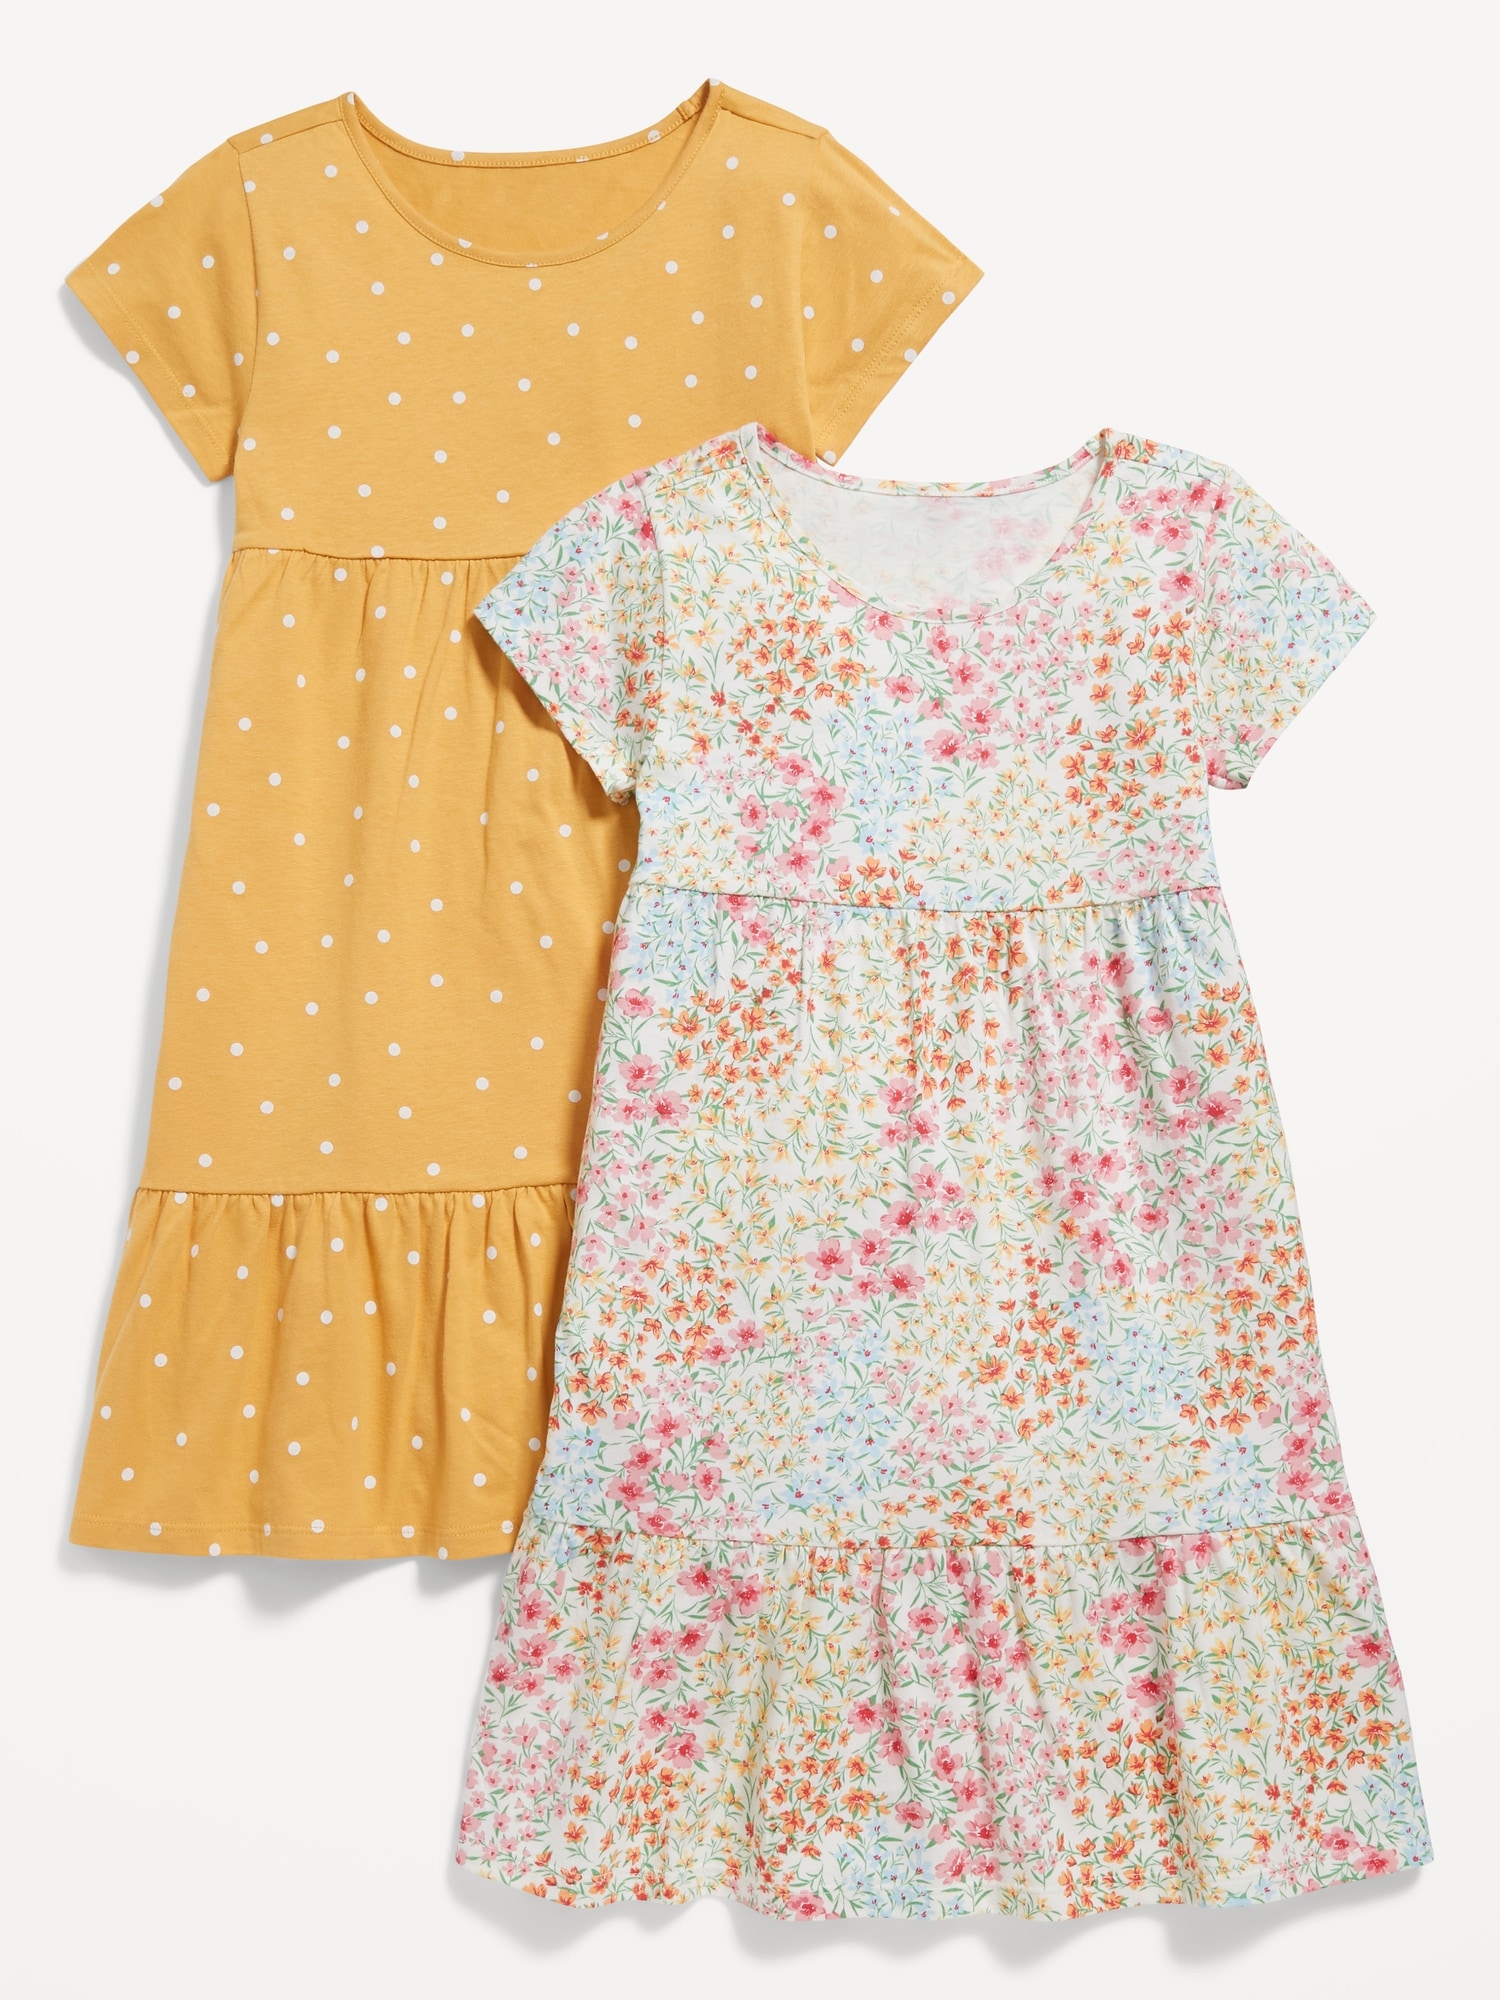 Printed Jersey-Knit Swing Dress 2-Pack for Girls